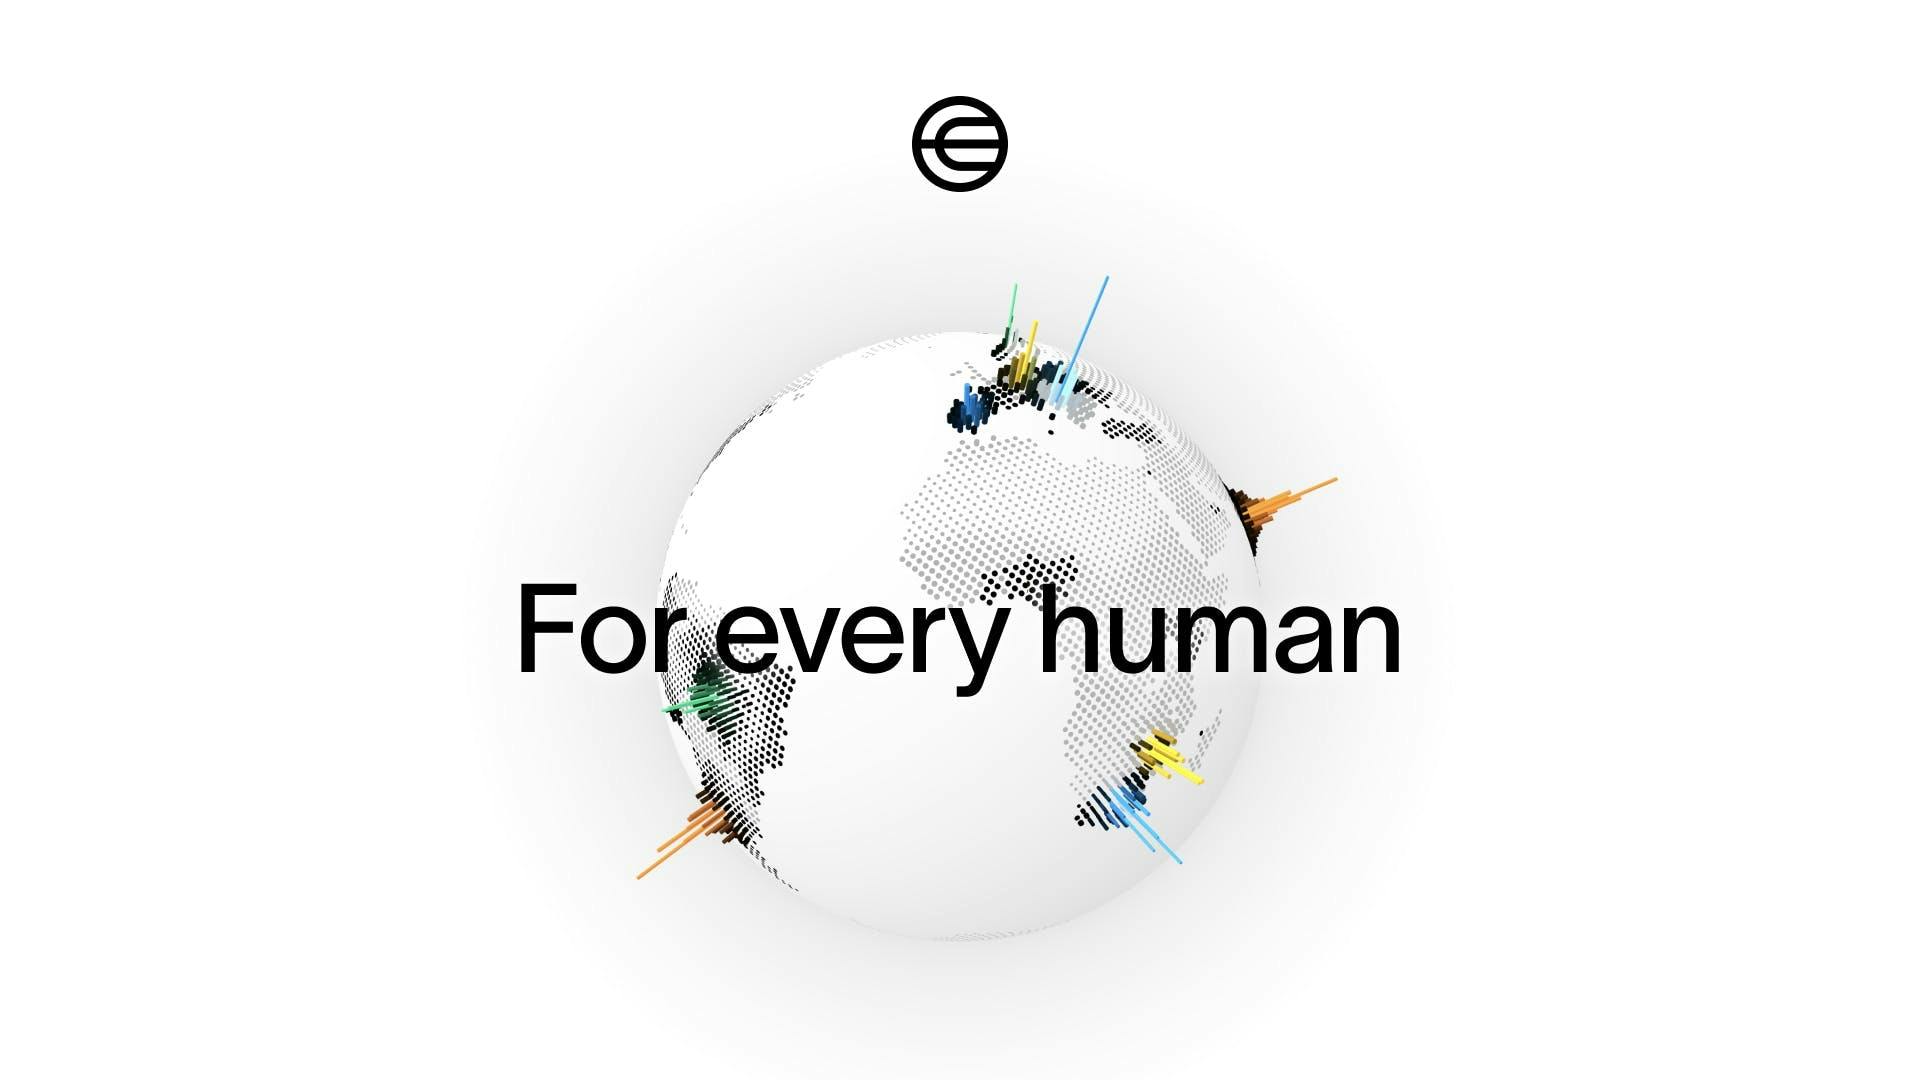 For every human